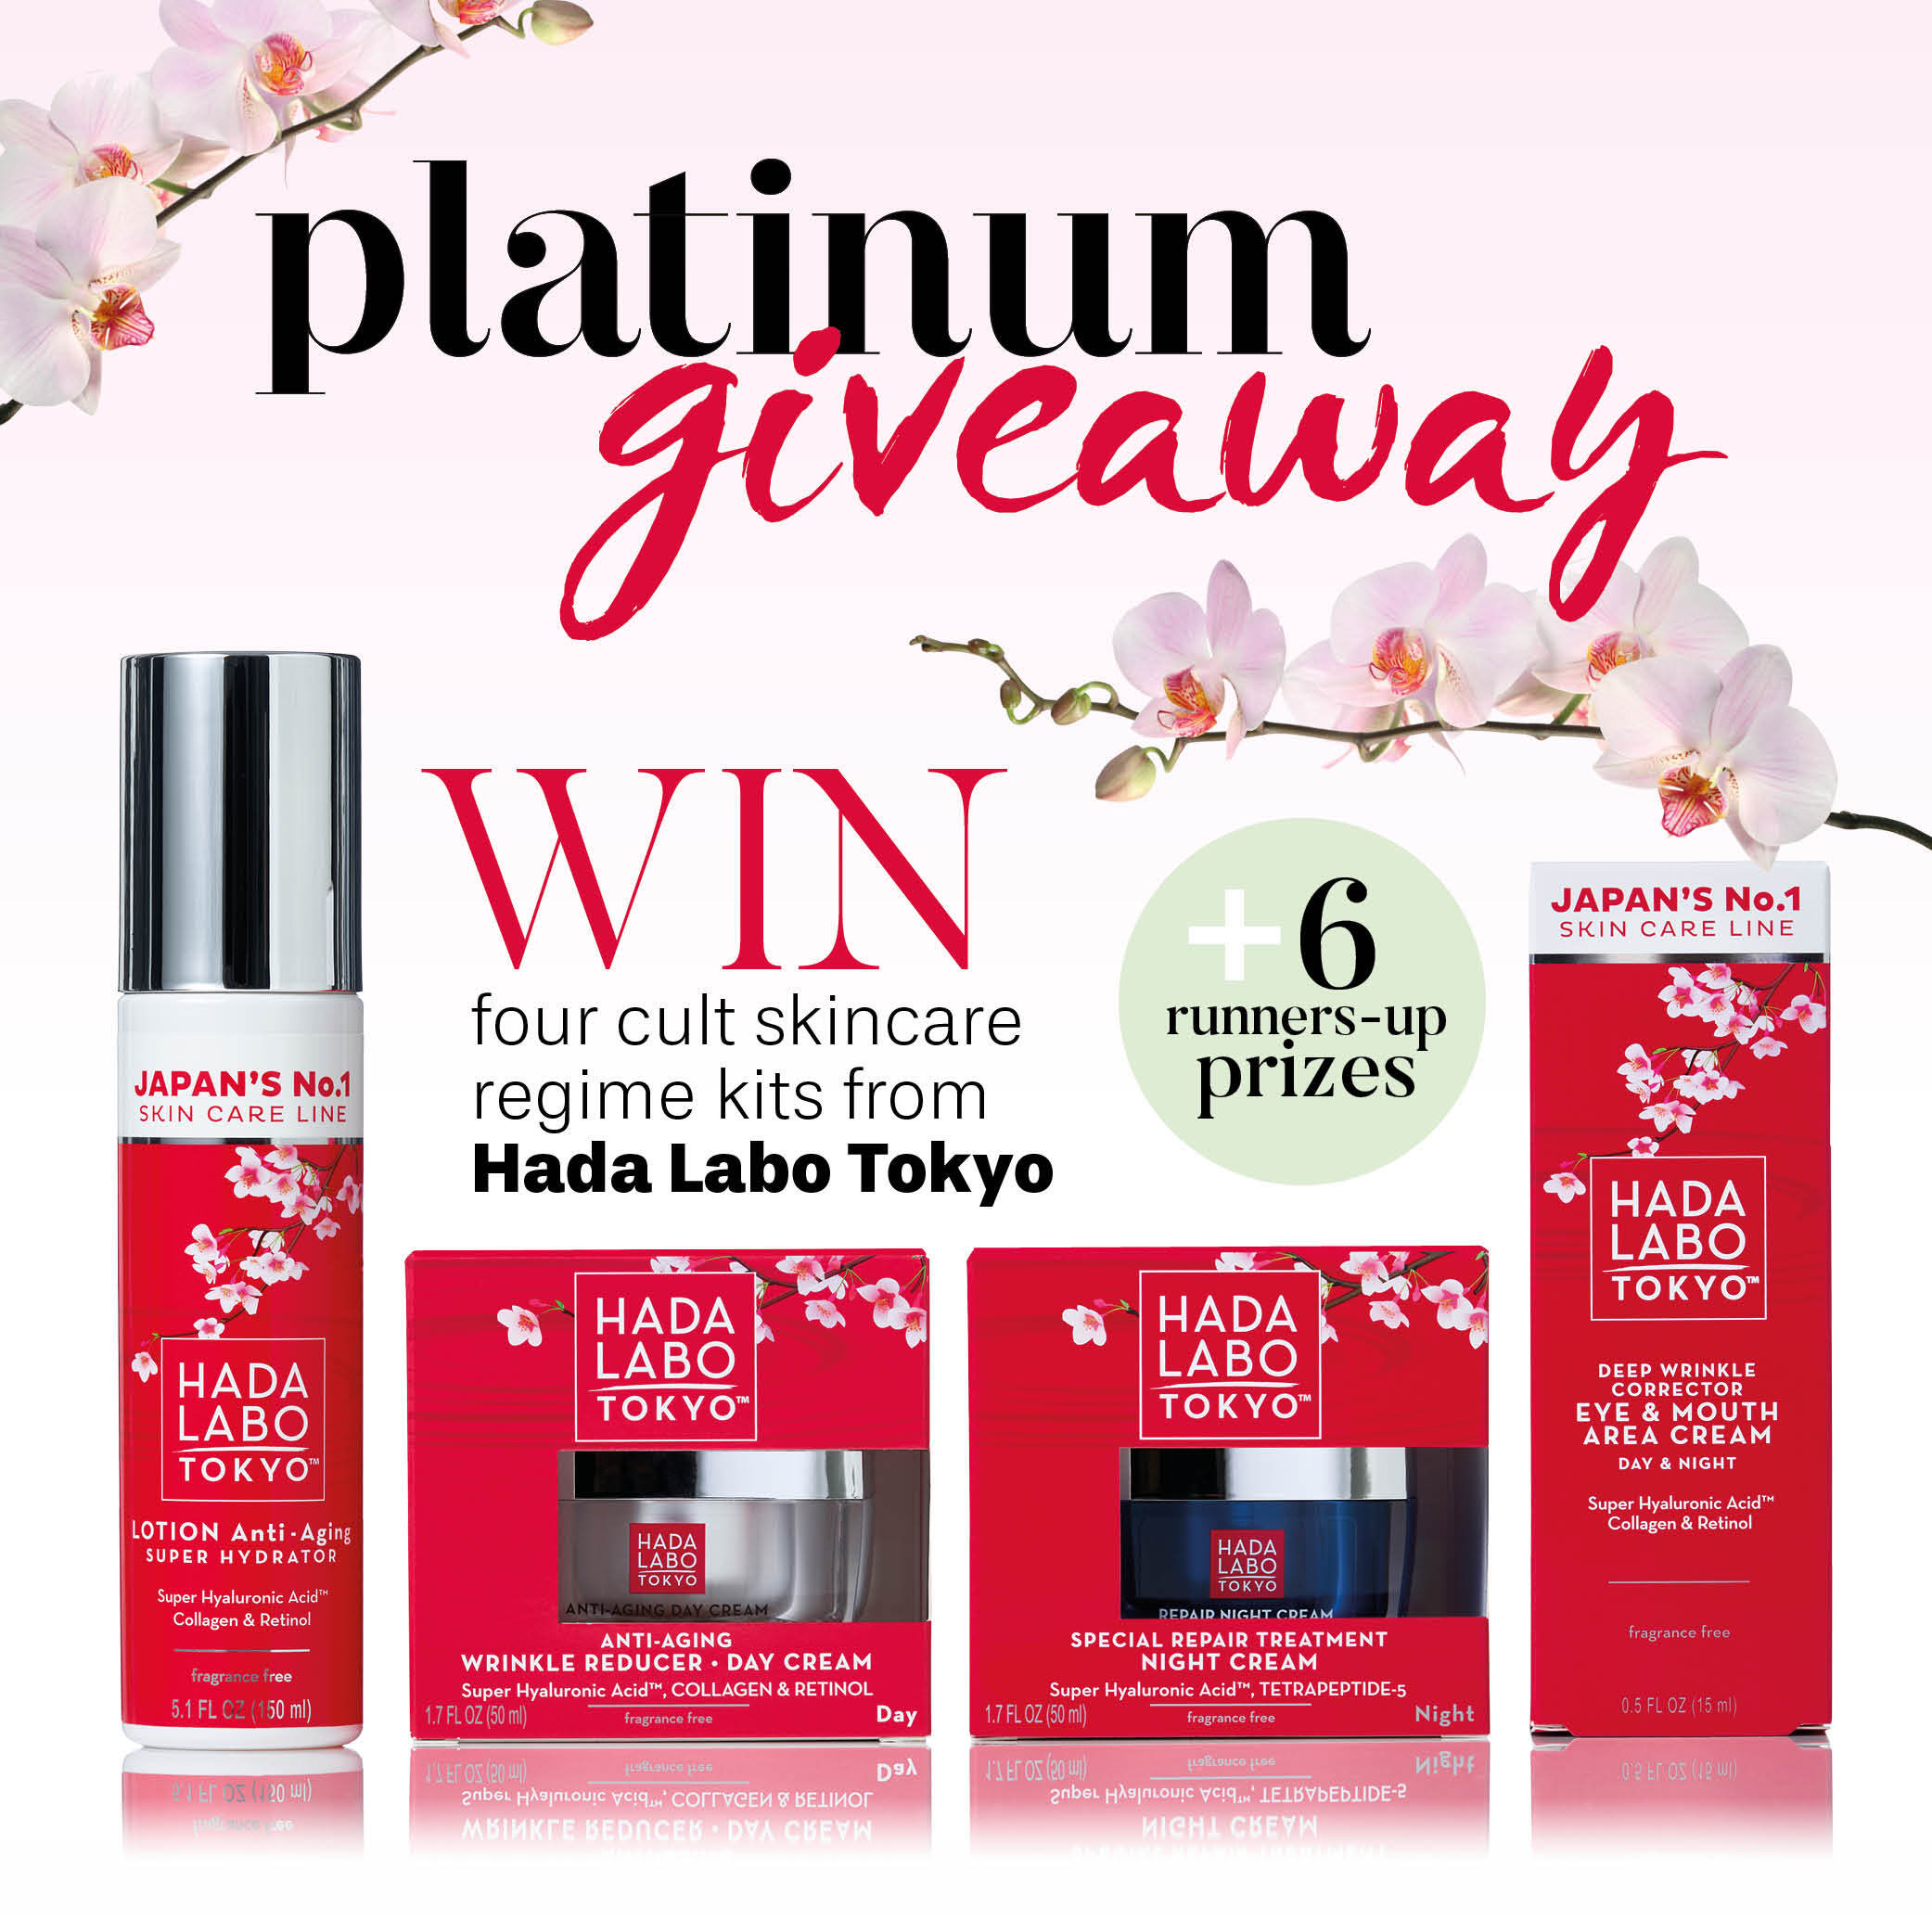 Platinum giveaway with Hada Labo Toyko